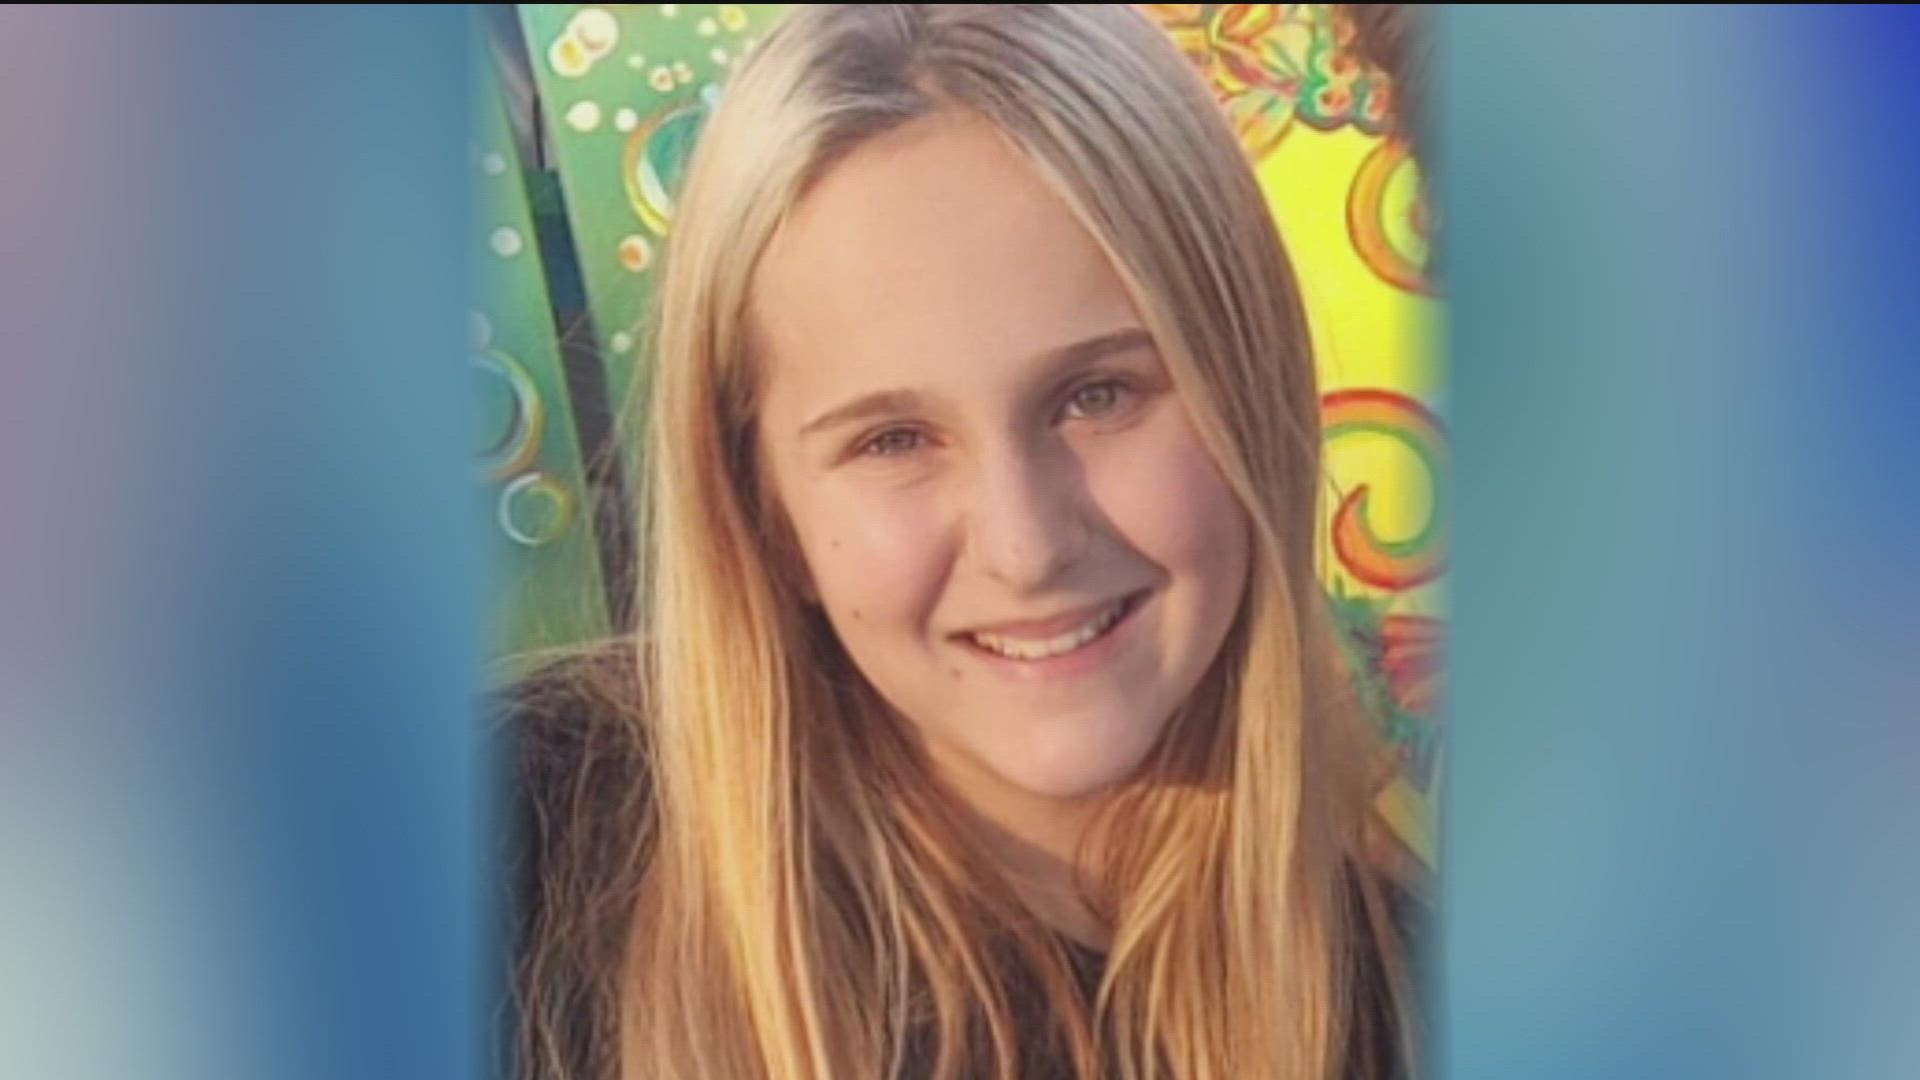 Authorities requested the public's help locating a missing at-risk juvenile last seen in the North County area of San Diego.